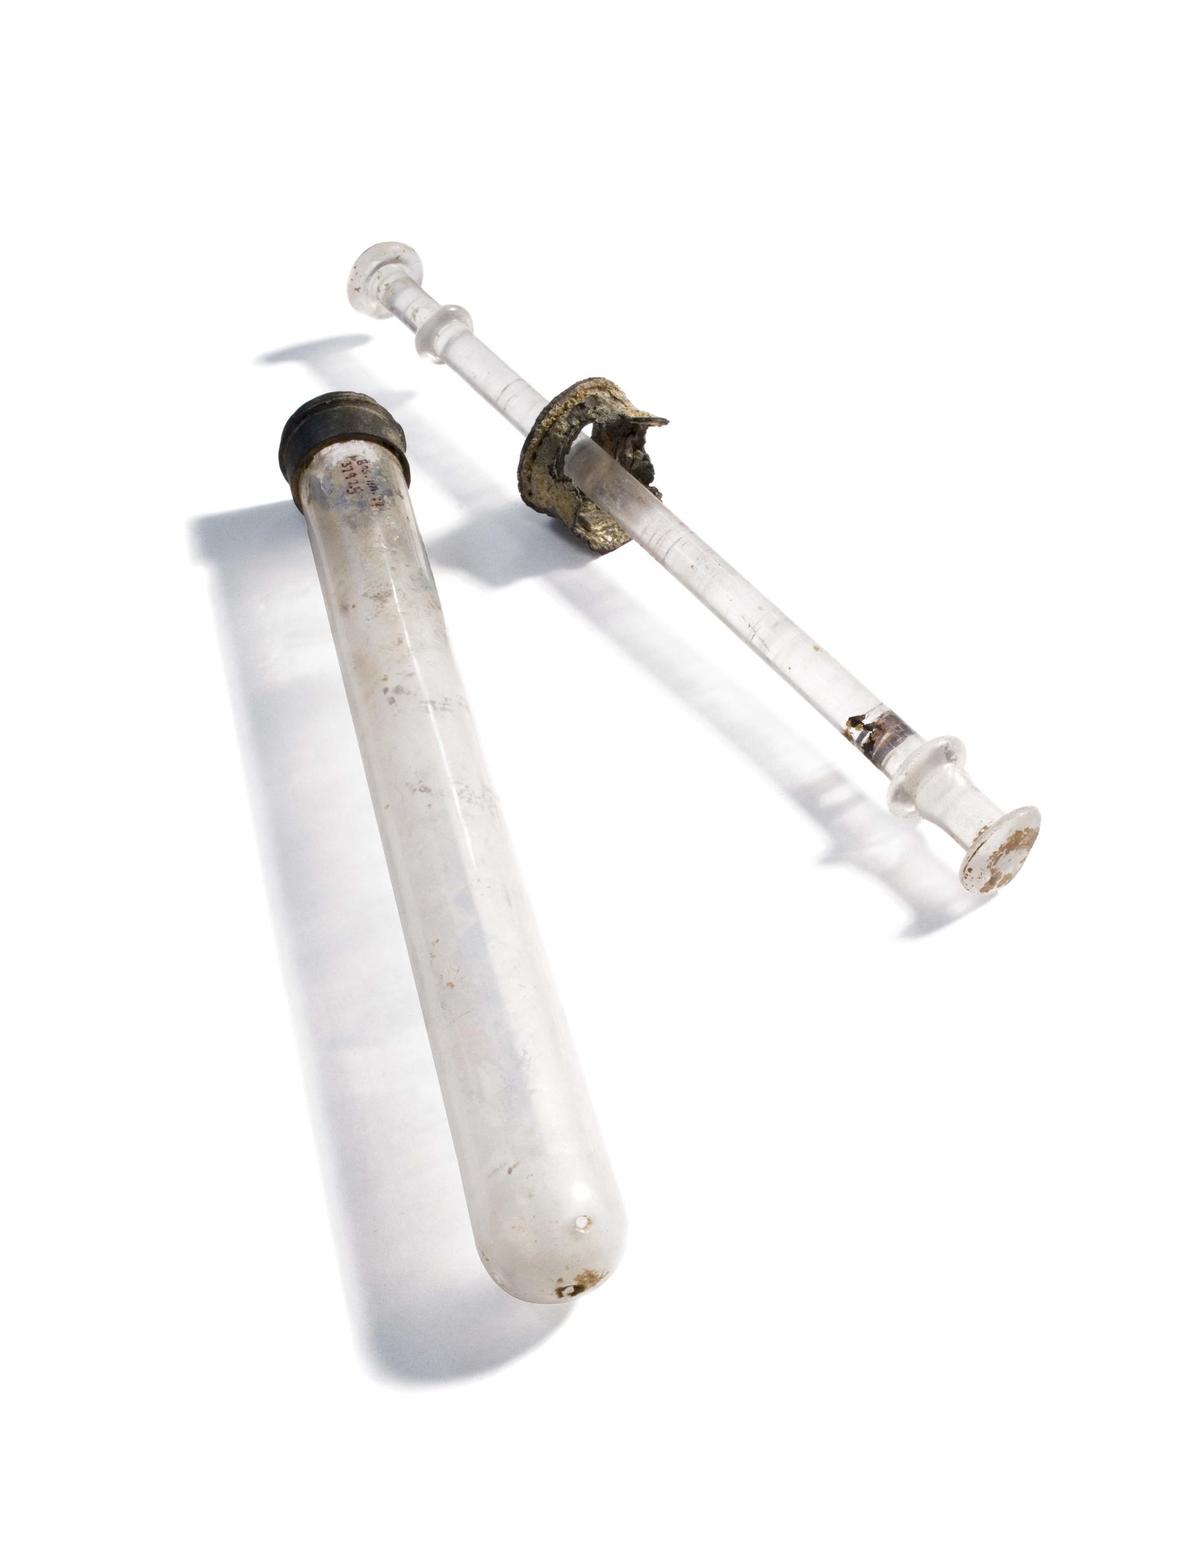 A clear glass vaginal syringe from the 1860s